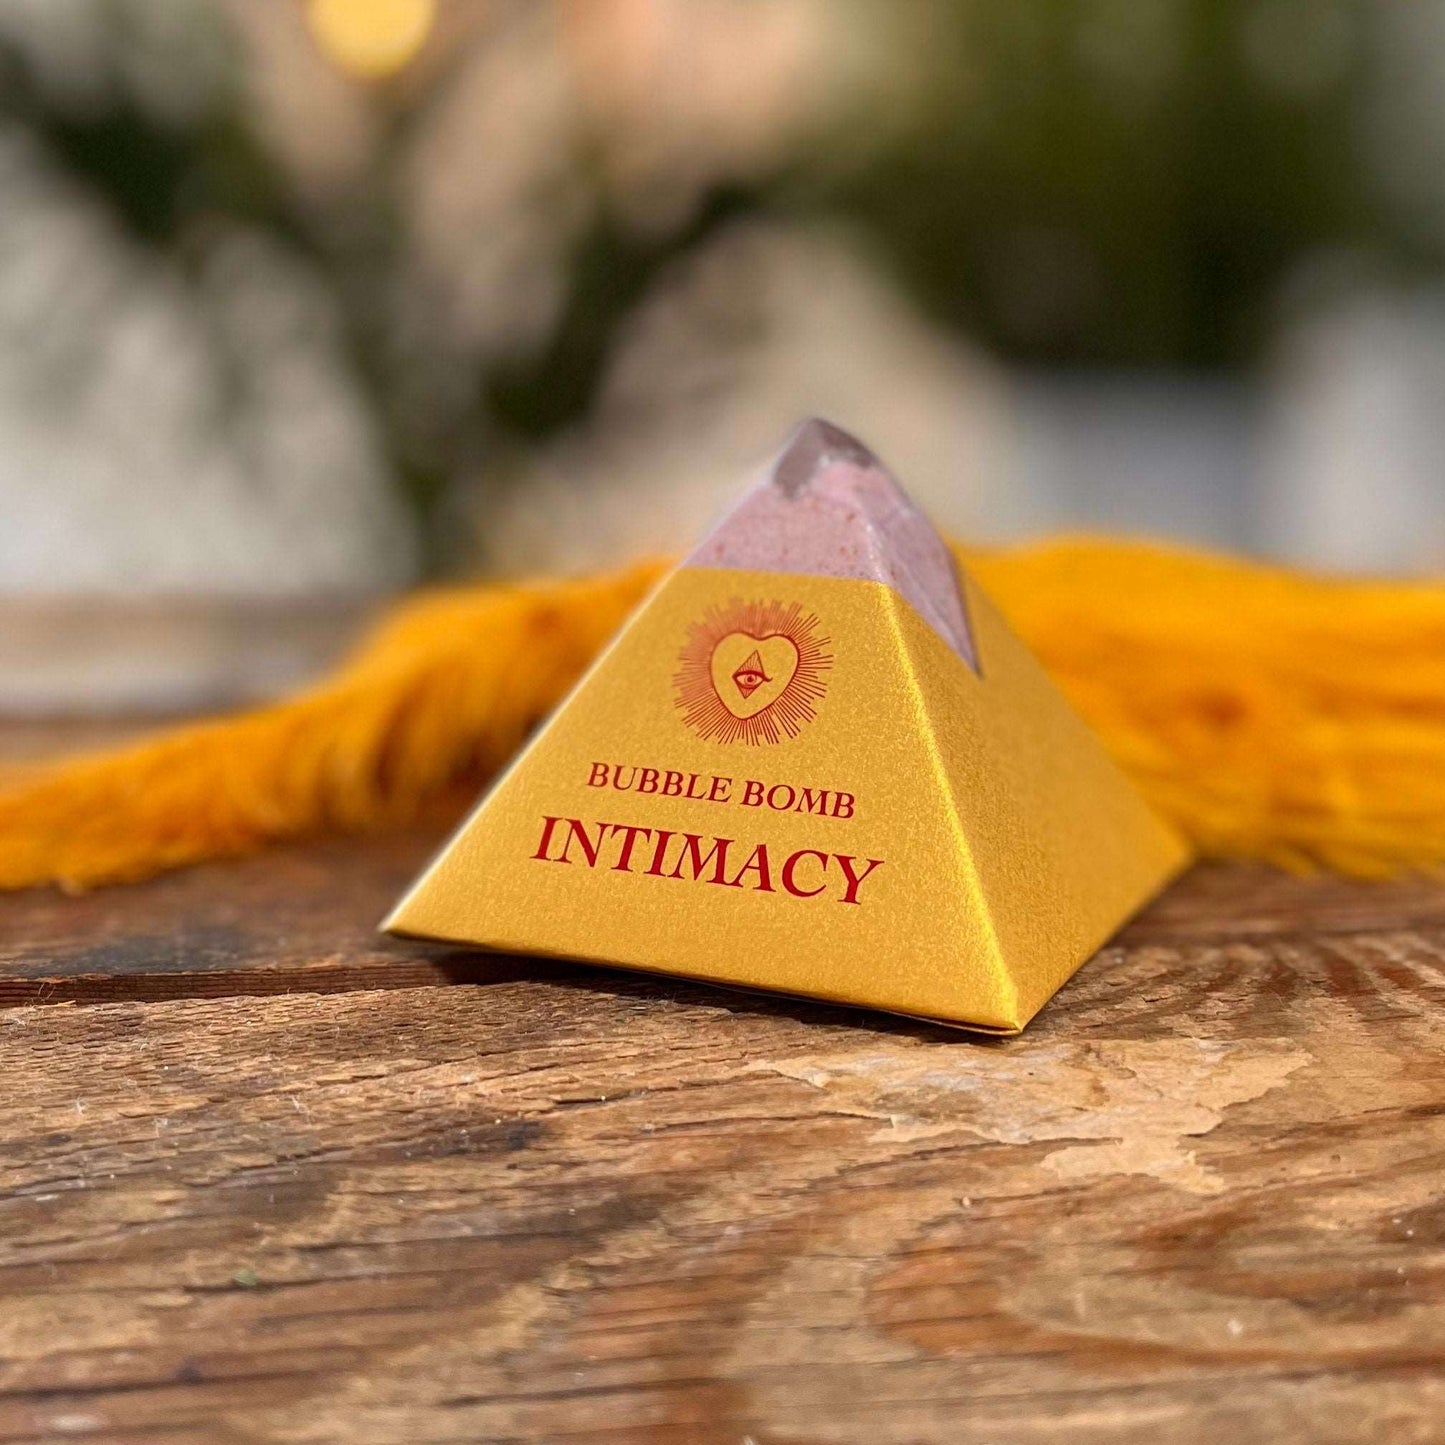 Elevate your bath time with our Intimacy Bubble Bomb, infused with the enticing blend of organic Orange, Bergamot, and Grapefruit essential oils. Immerse yourself in a luxurious bubble bath experience that promotes a sensual and uplifting atmosphere, enhancing feelings of connection and joy.